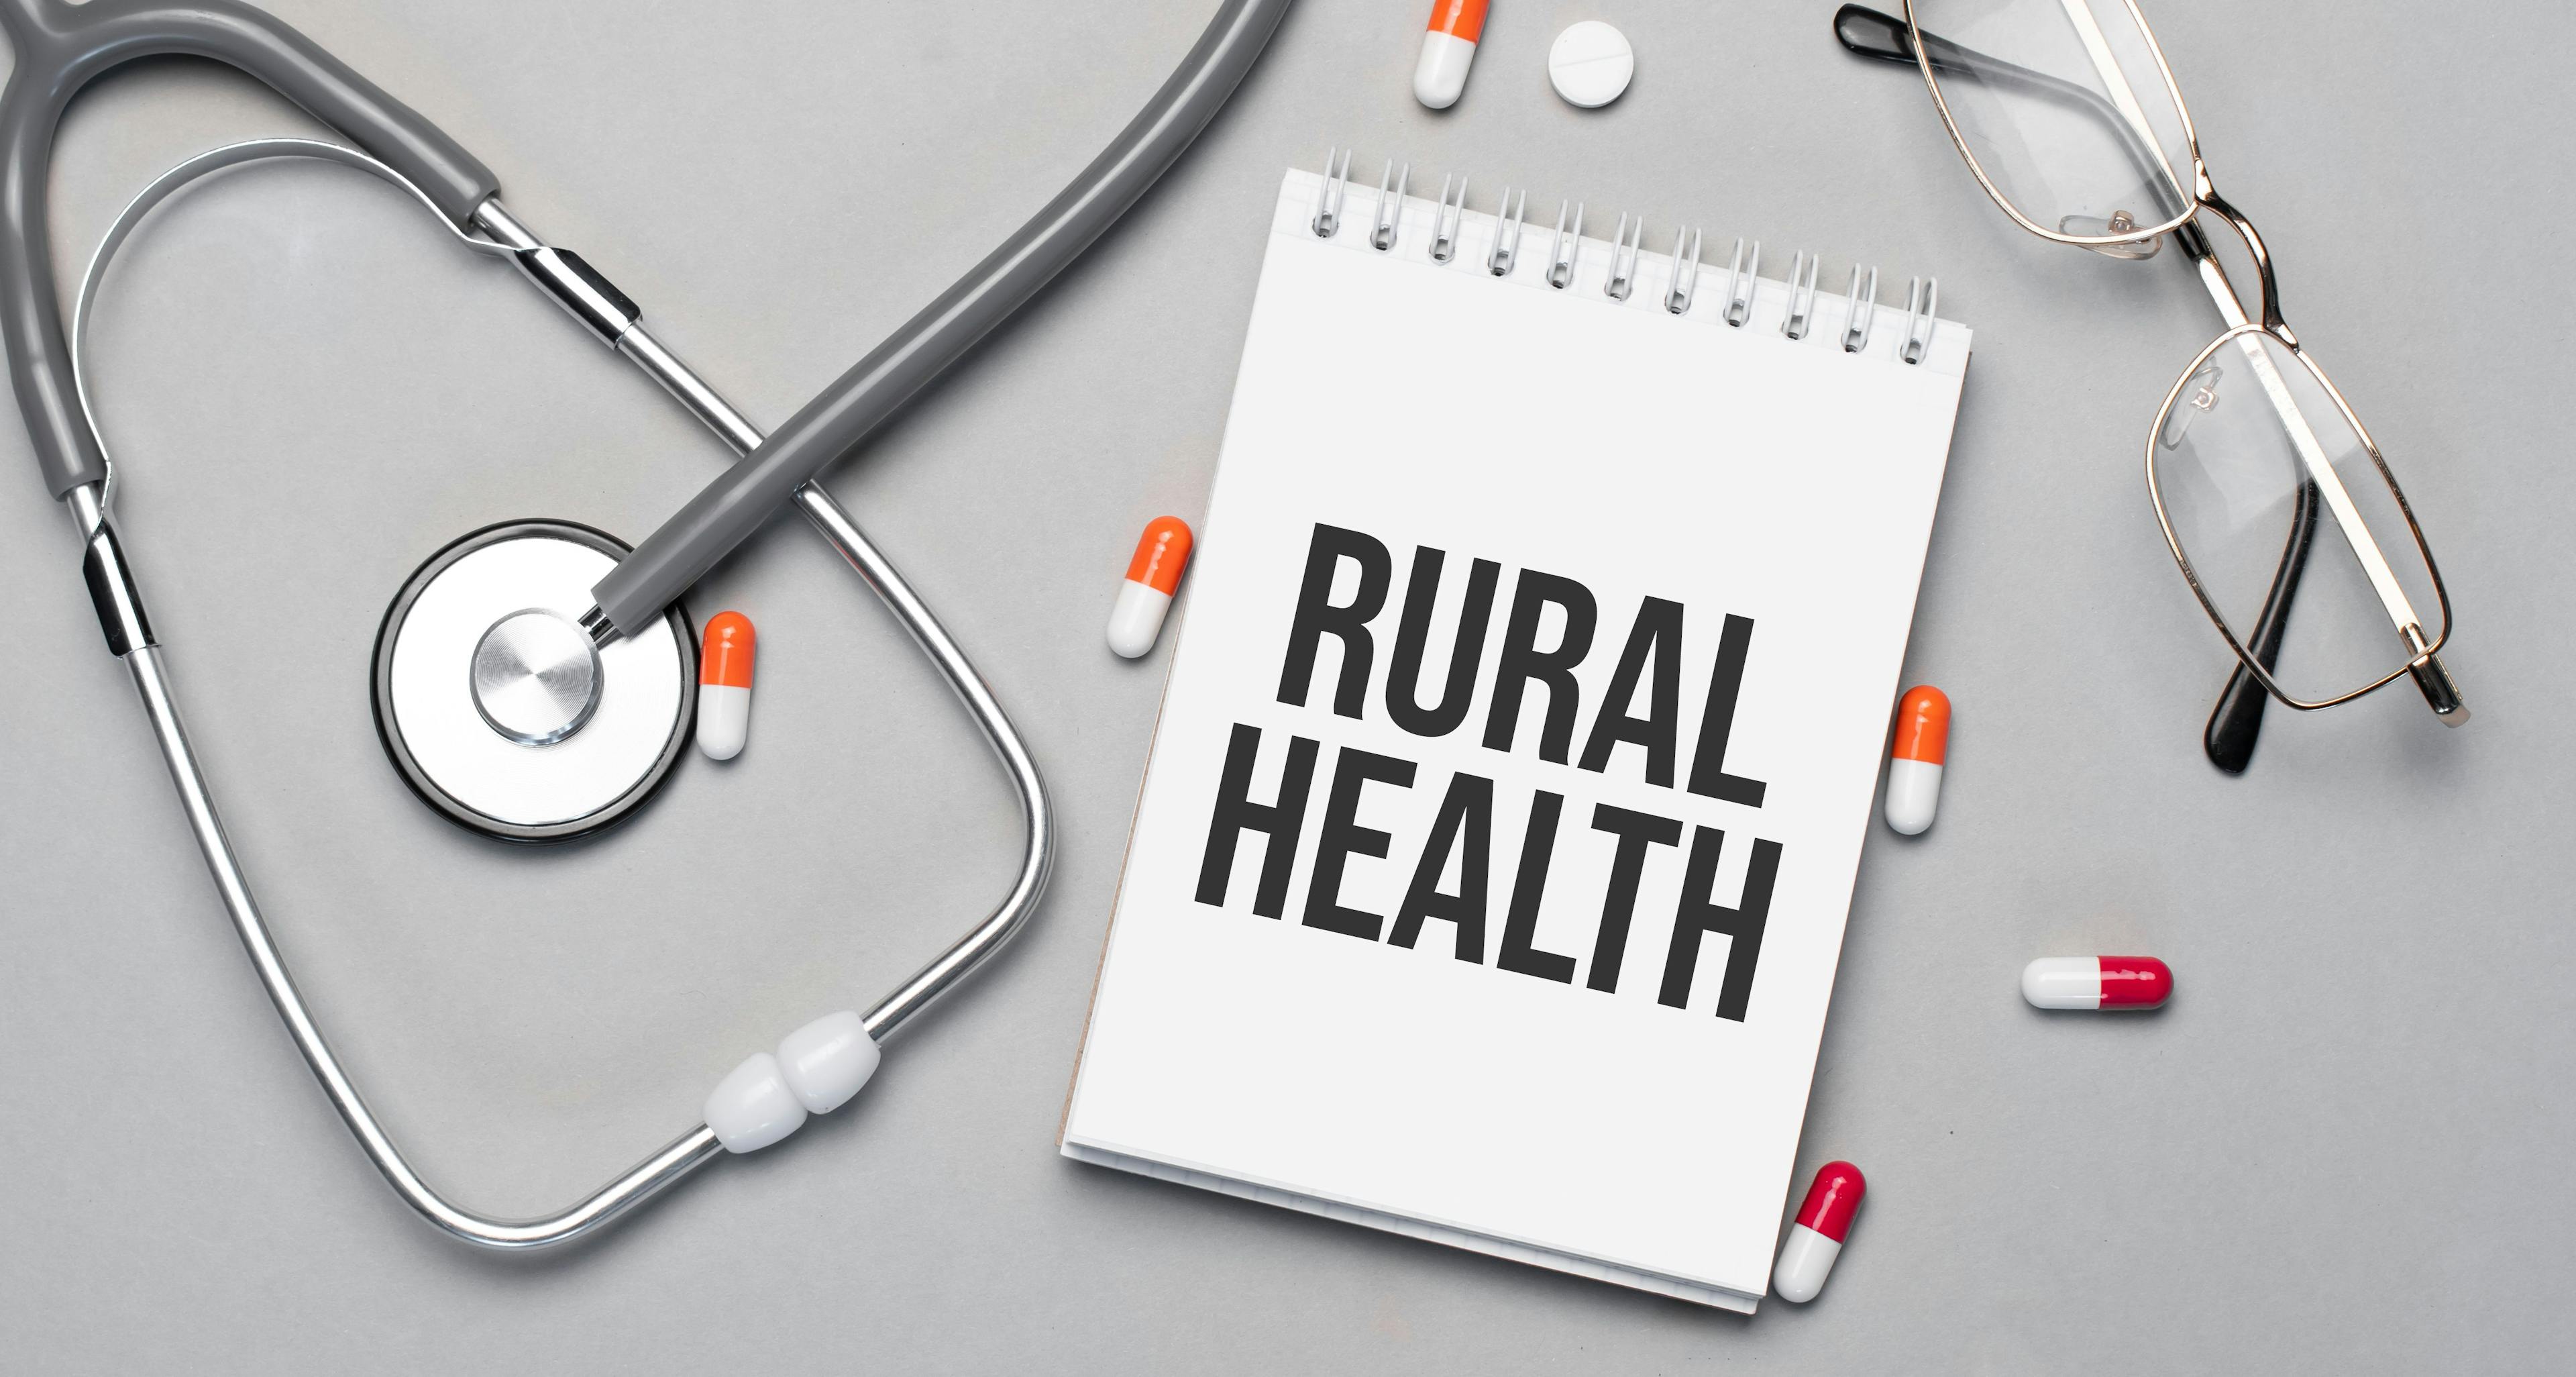 Rural health gets a boost in Texas: ©Andrey - stock.adobe.com